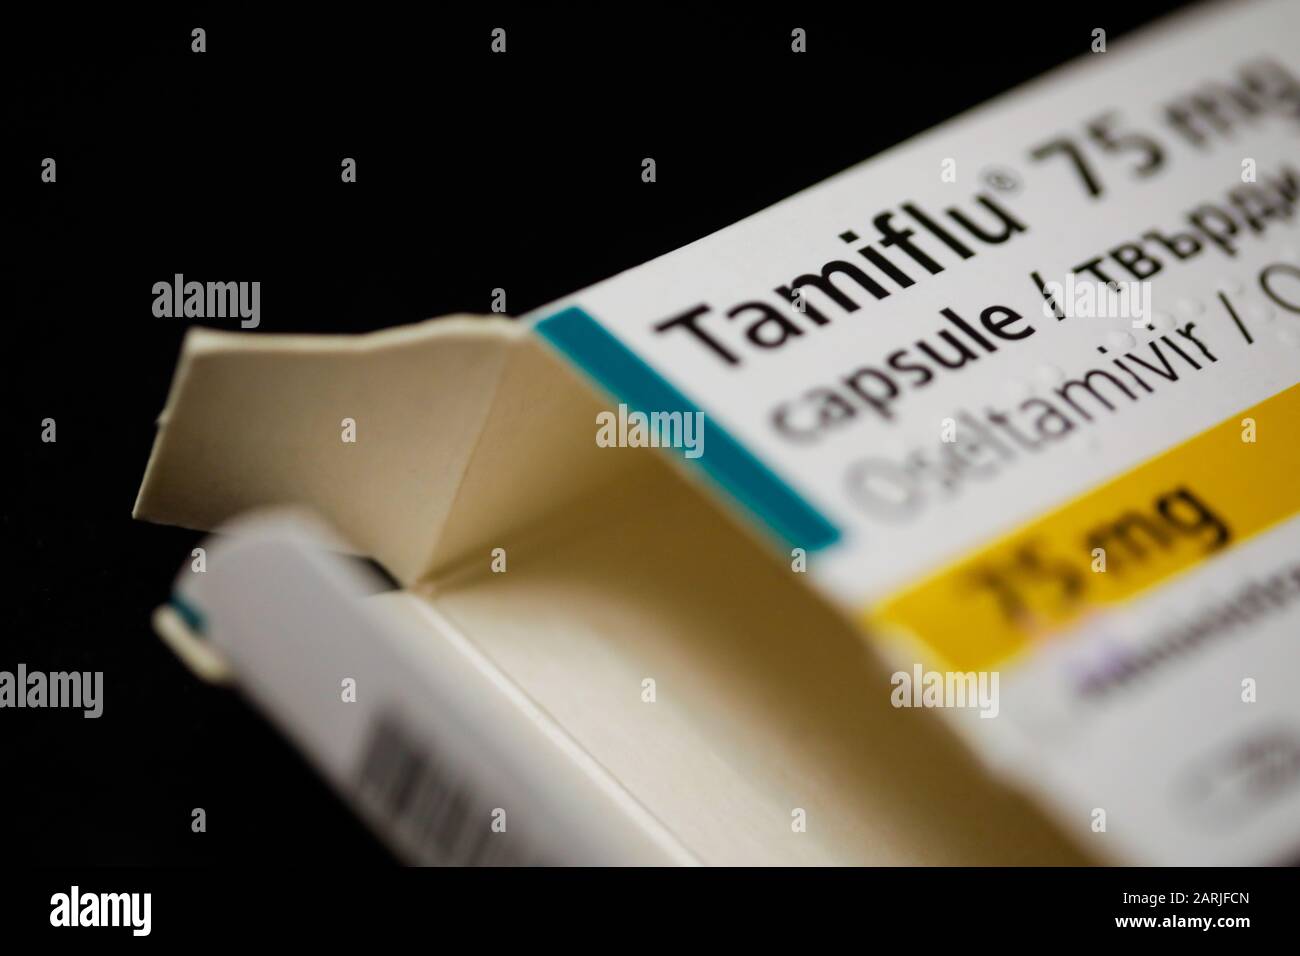 Bucharest, Romania - January 26, 2020: Close up image with a Tamiflu package. Tamiflu is an antiviral medication that blocks the actions of influenza Stock Photo